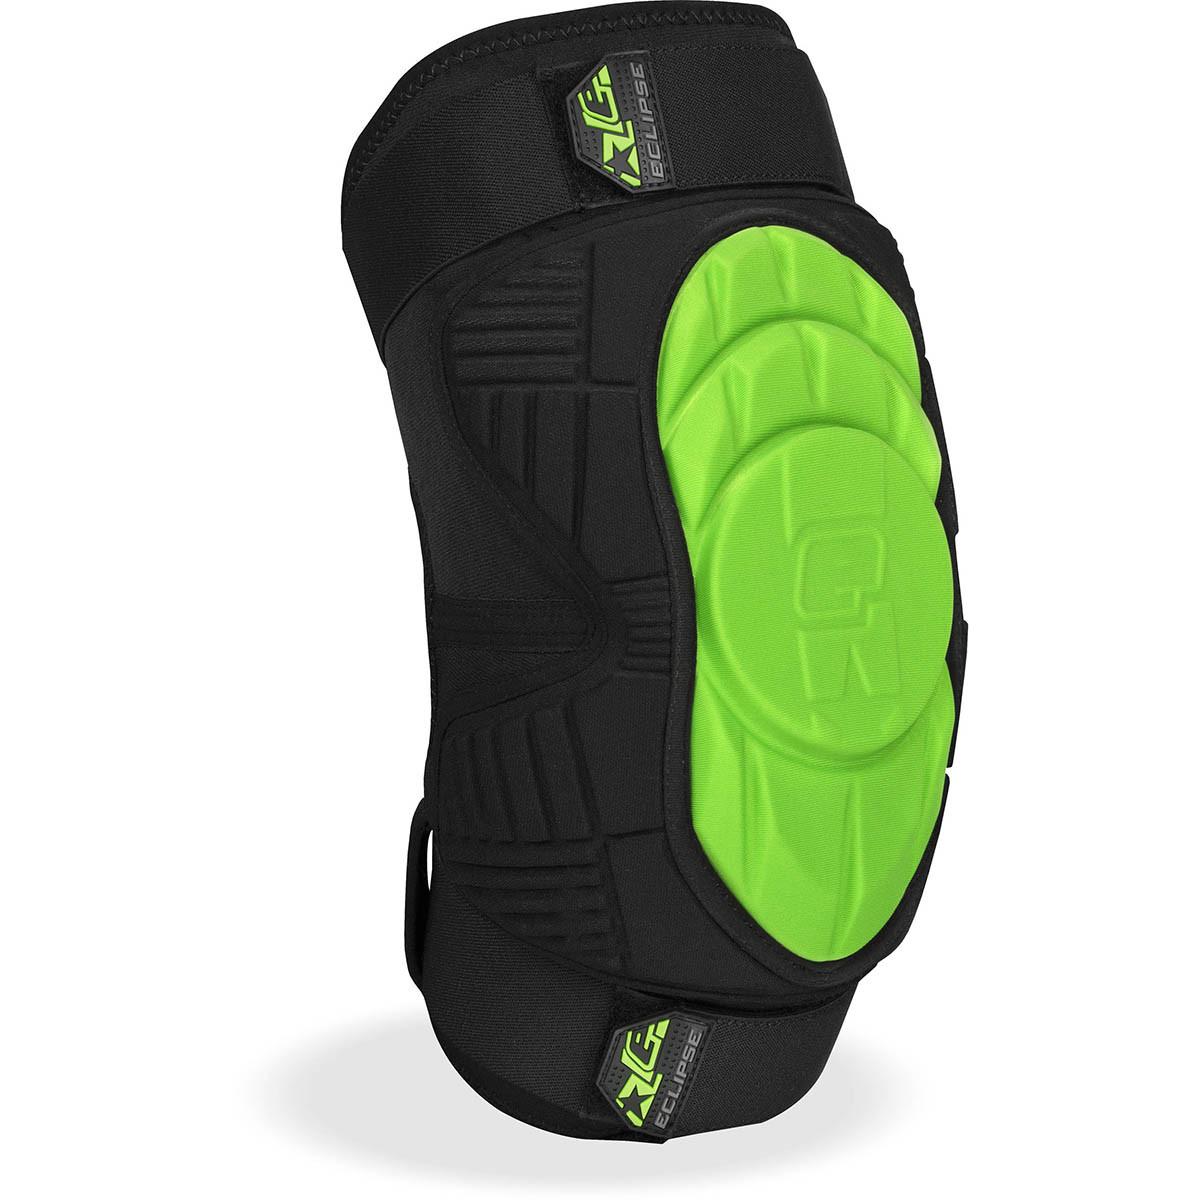 Planet Eclipse - HD Core Knee Pads G3 - Green